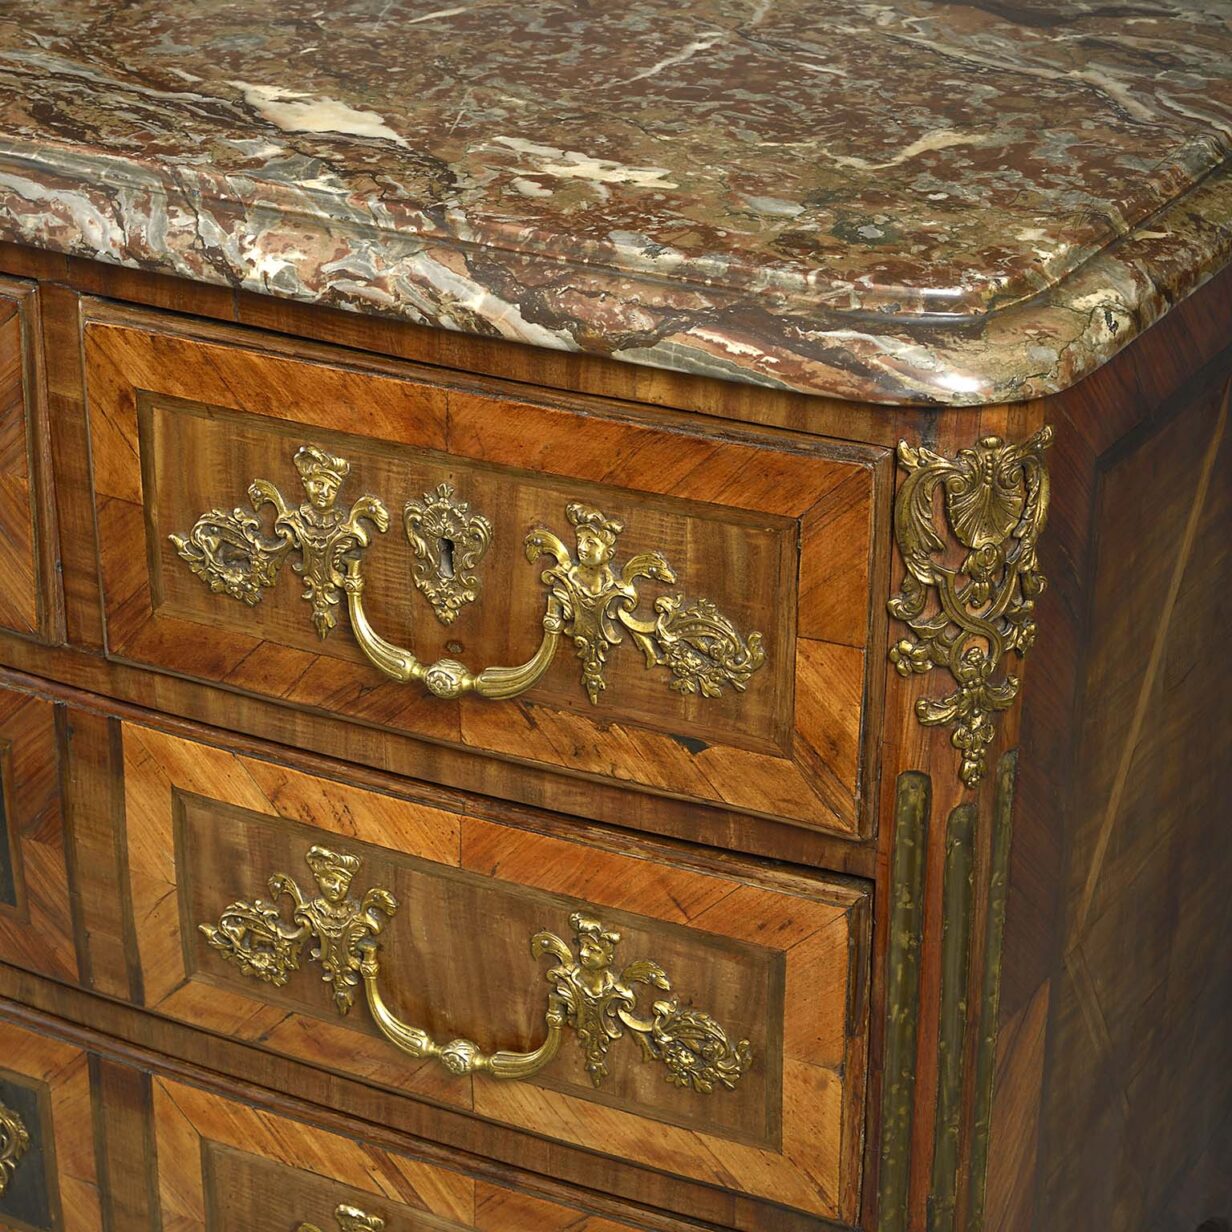 Fine early 18th century louis xiv period commode